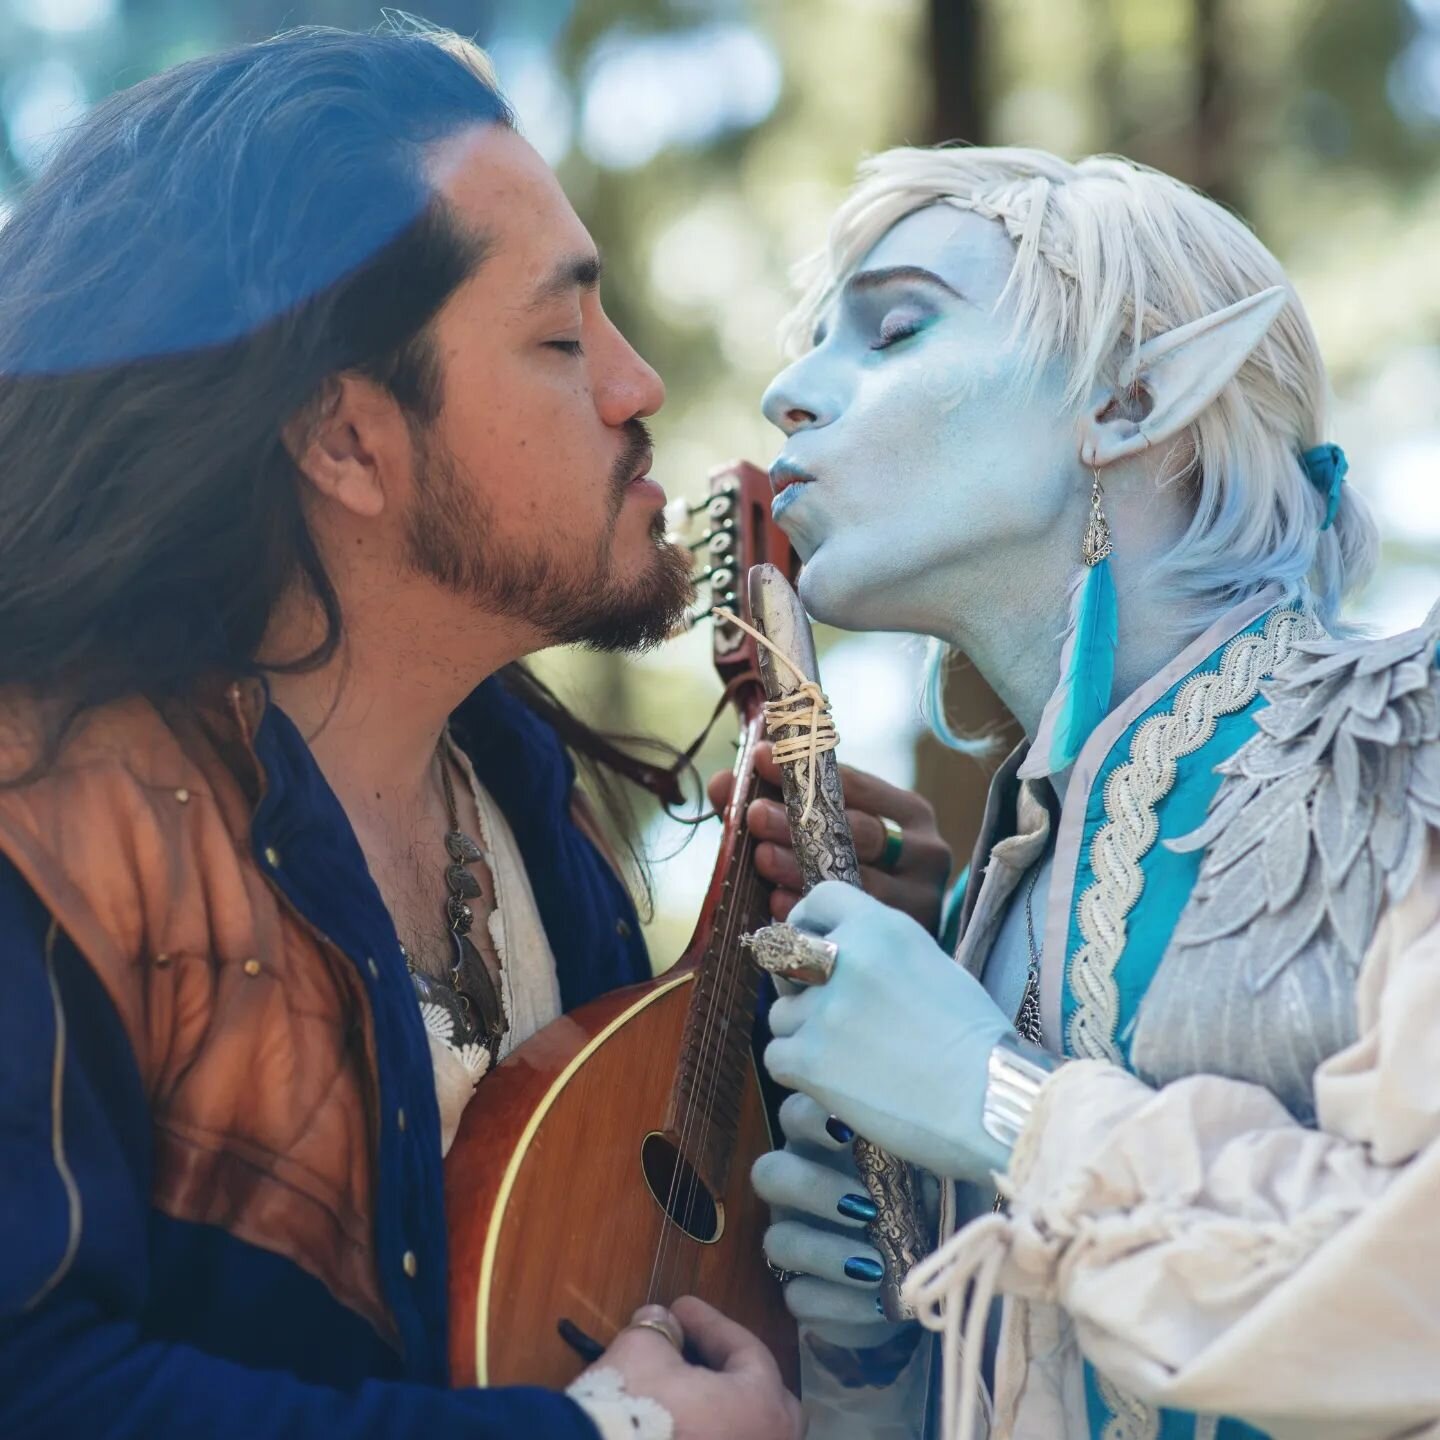 Working on my fingering (it's a music thing you absolute sicko) with @forgeling 

When Two Bards Meet premieres tonight at 9pm 🥲💙🥲

 
📷 @crow_zoey 
🎥@deerstalkerpictures